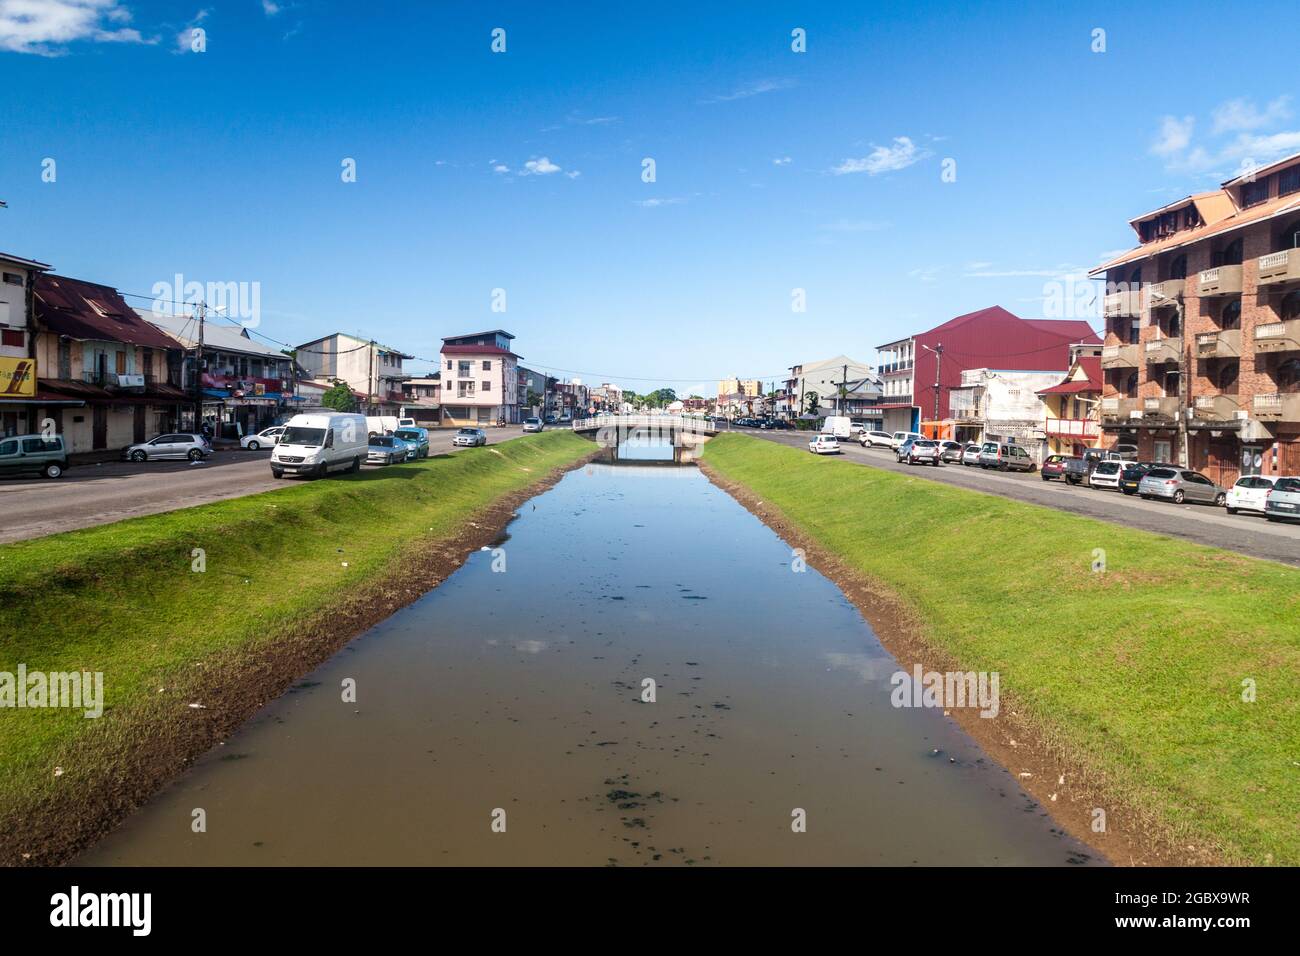 CAYENNE, FRENCH GUIANA - AUGUST 1, 2015: Canal Laussat in the center of Cayenne, capital of French Guiana. Stock Photo